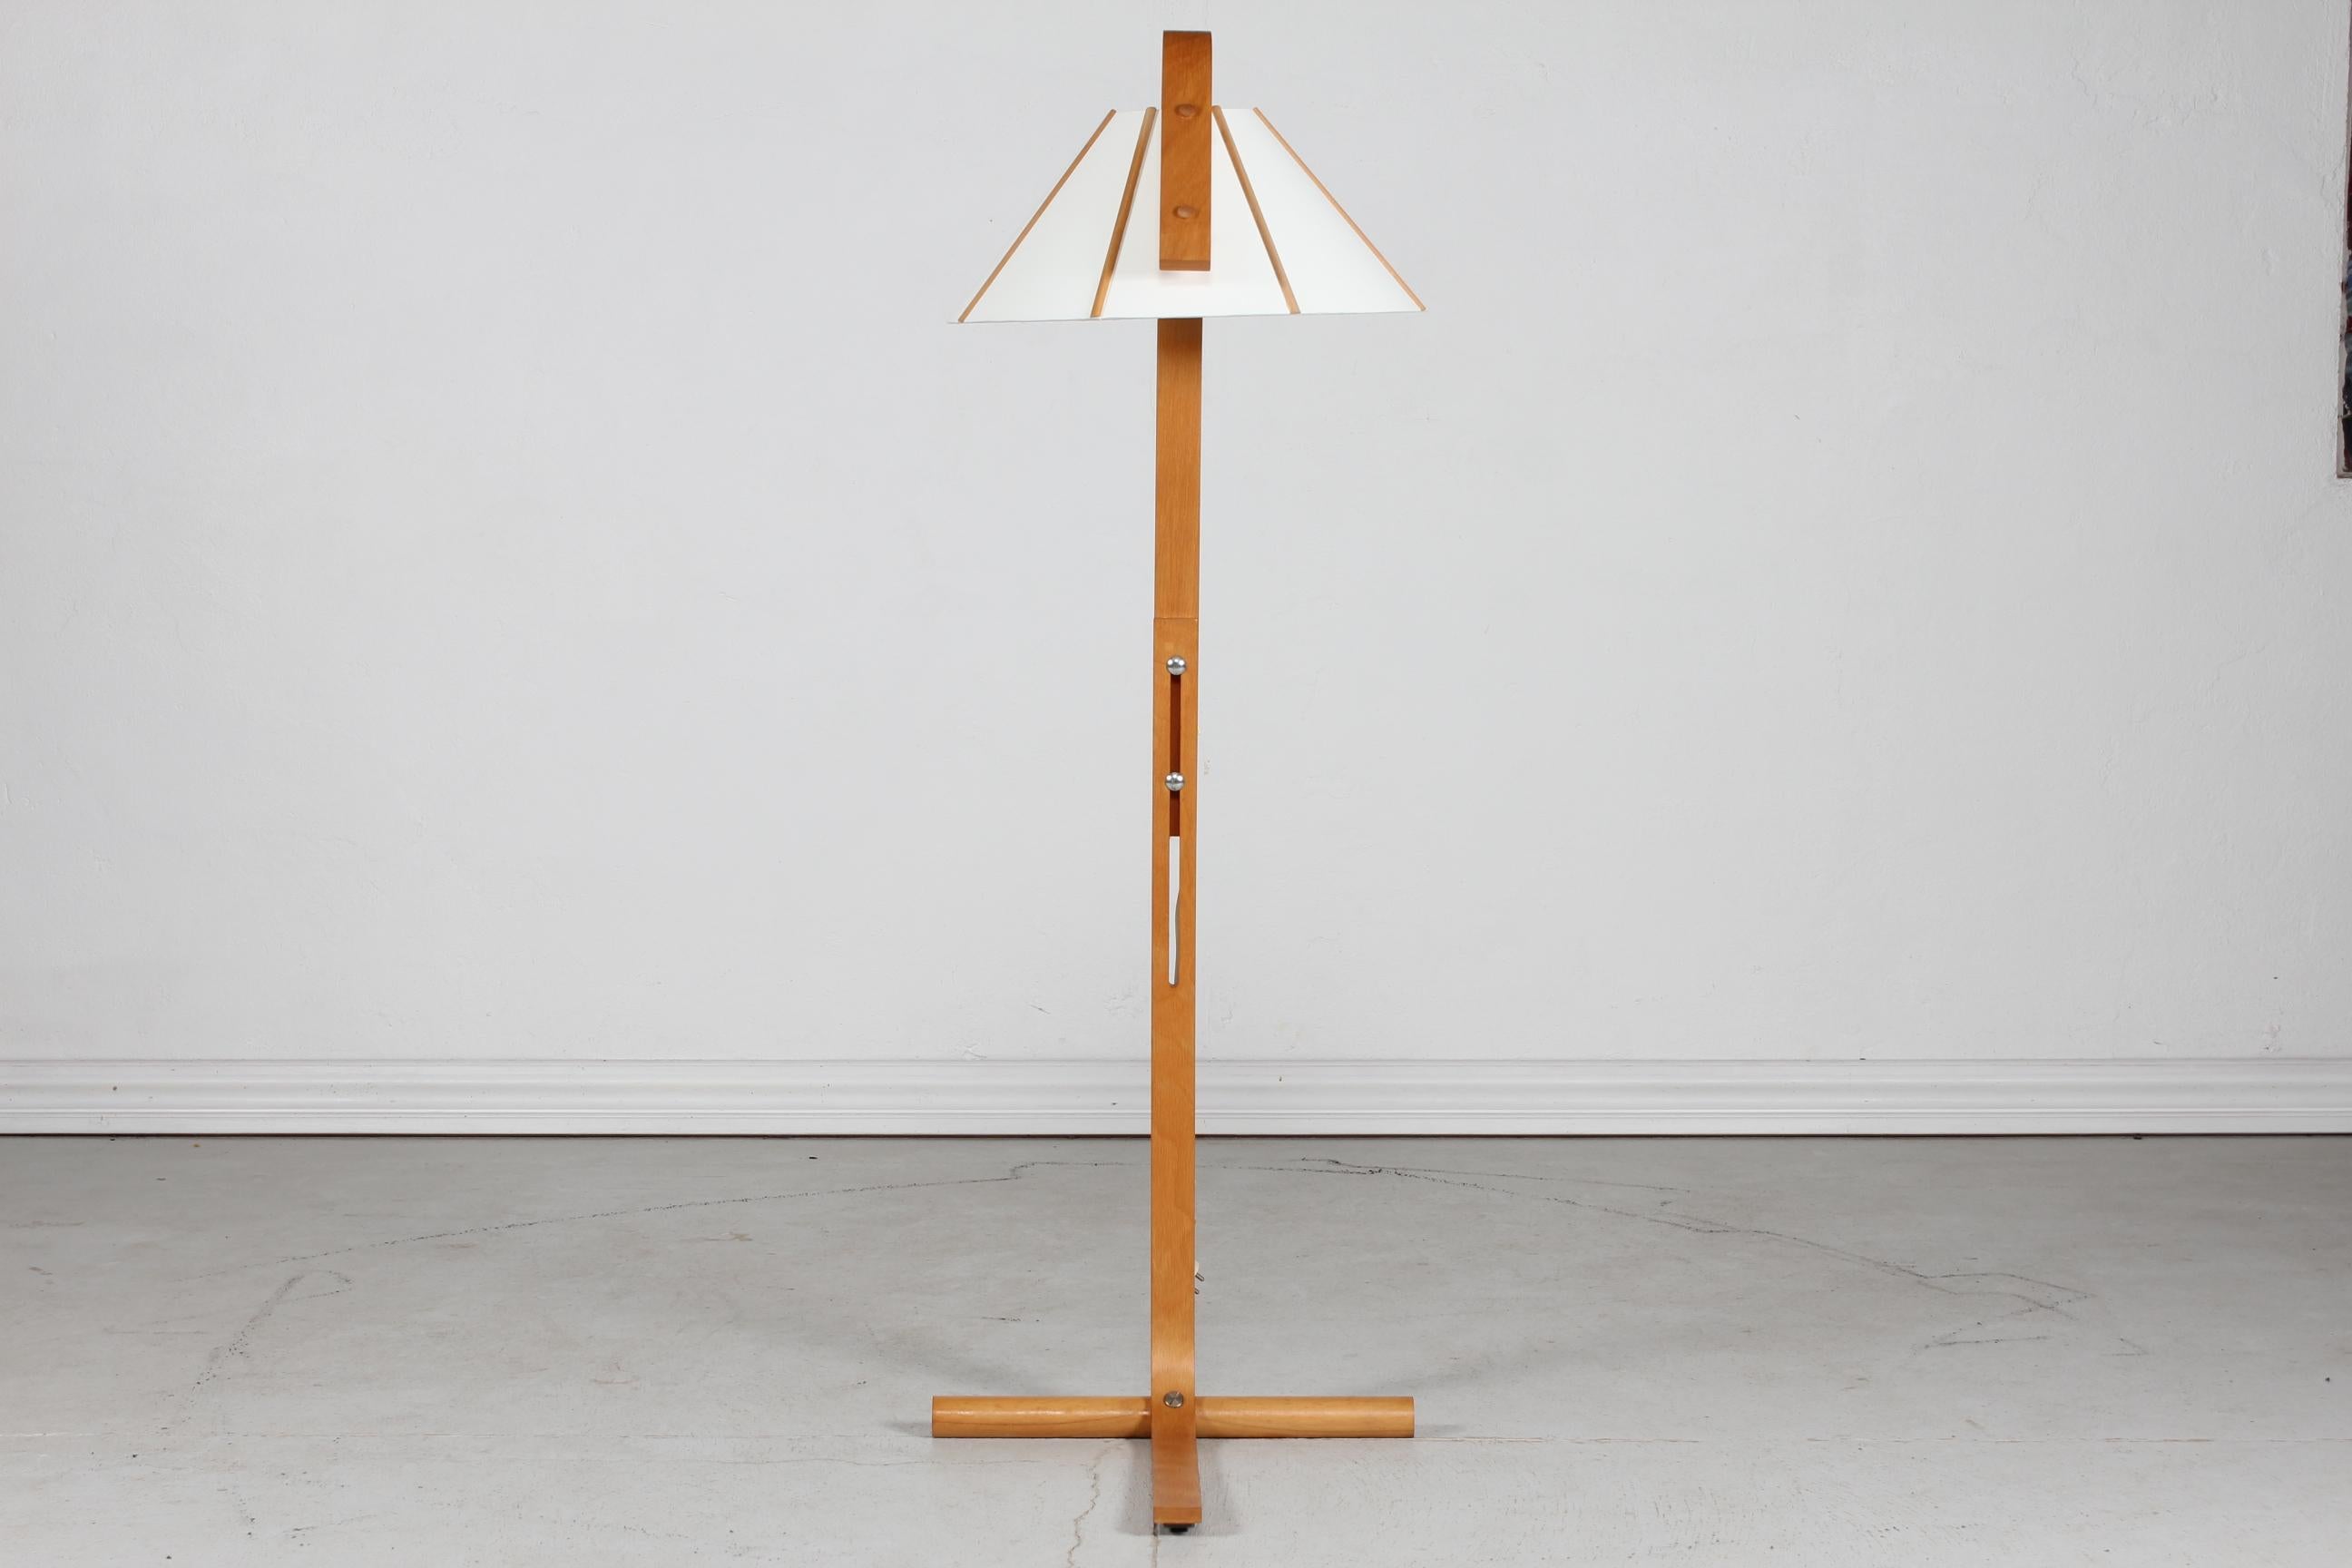 Original vintage floor lamp designed by Jan Wickelgren for Swedish lamp manufacturer Aneta in the 1970s.

The height of the lamp is adjustable from 115 cm til 140 cm.

It is made of beechwood and the shade is made of natural white linen fabric which